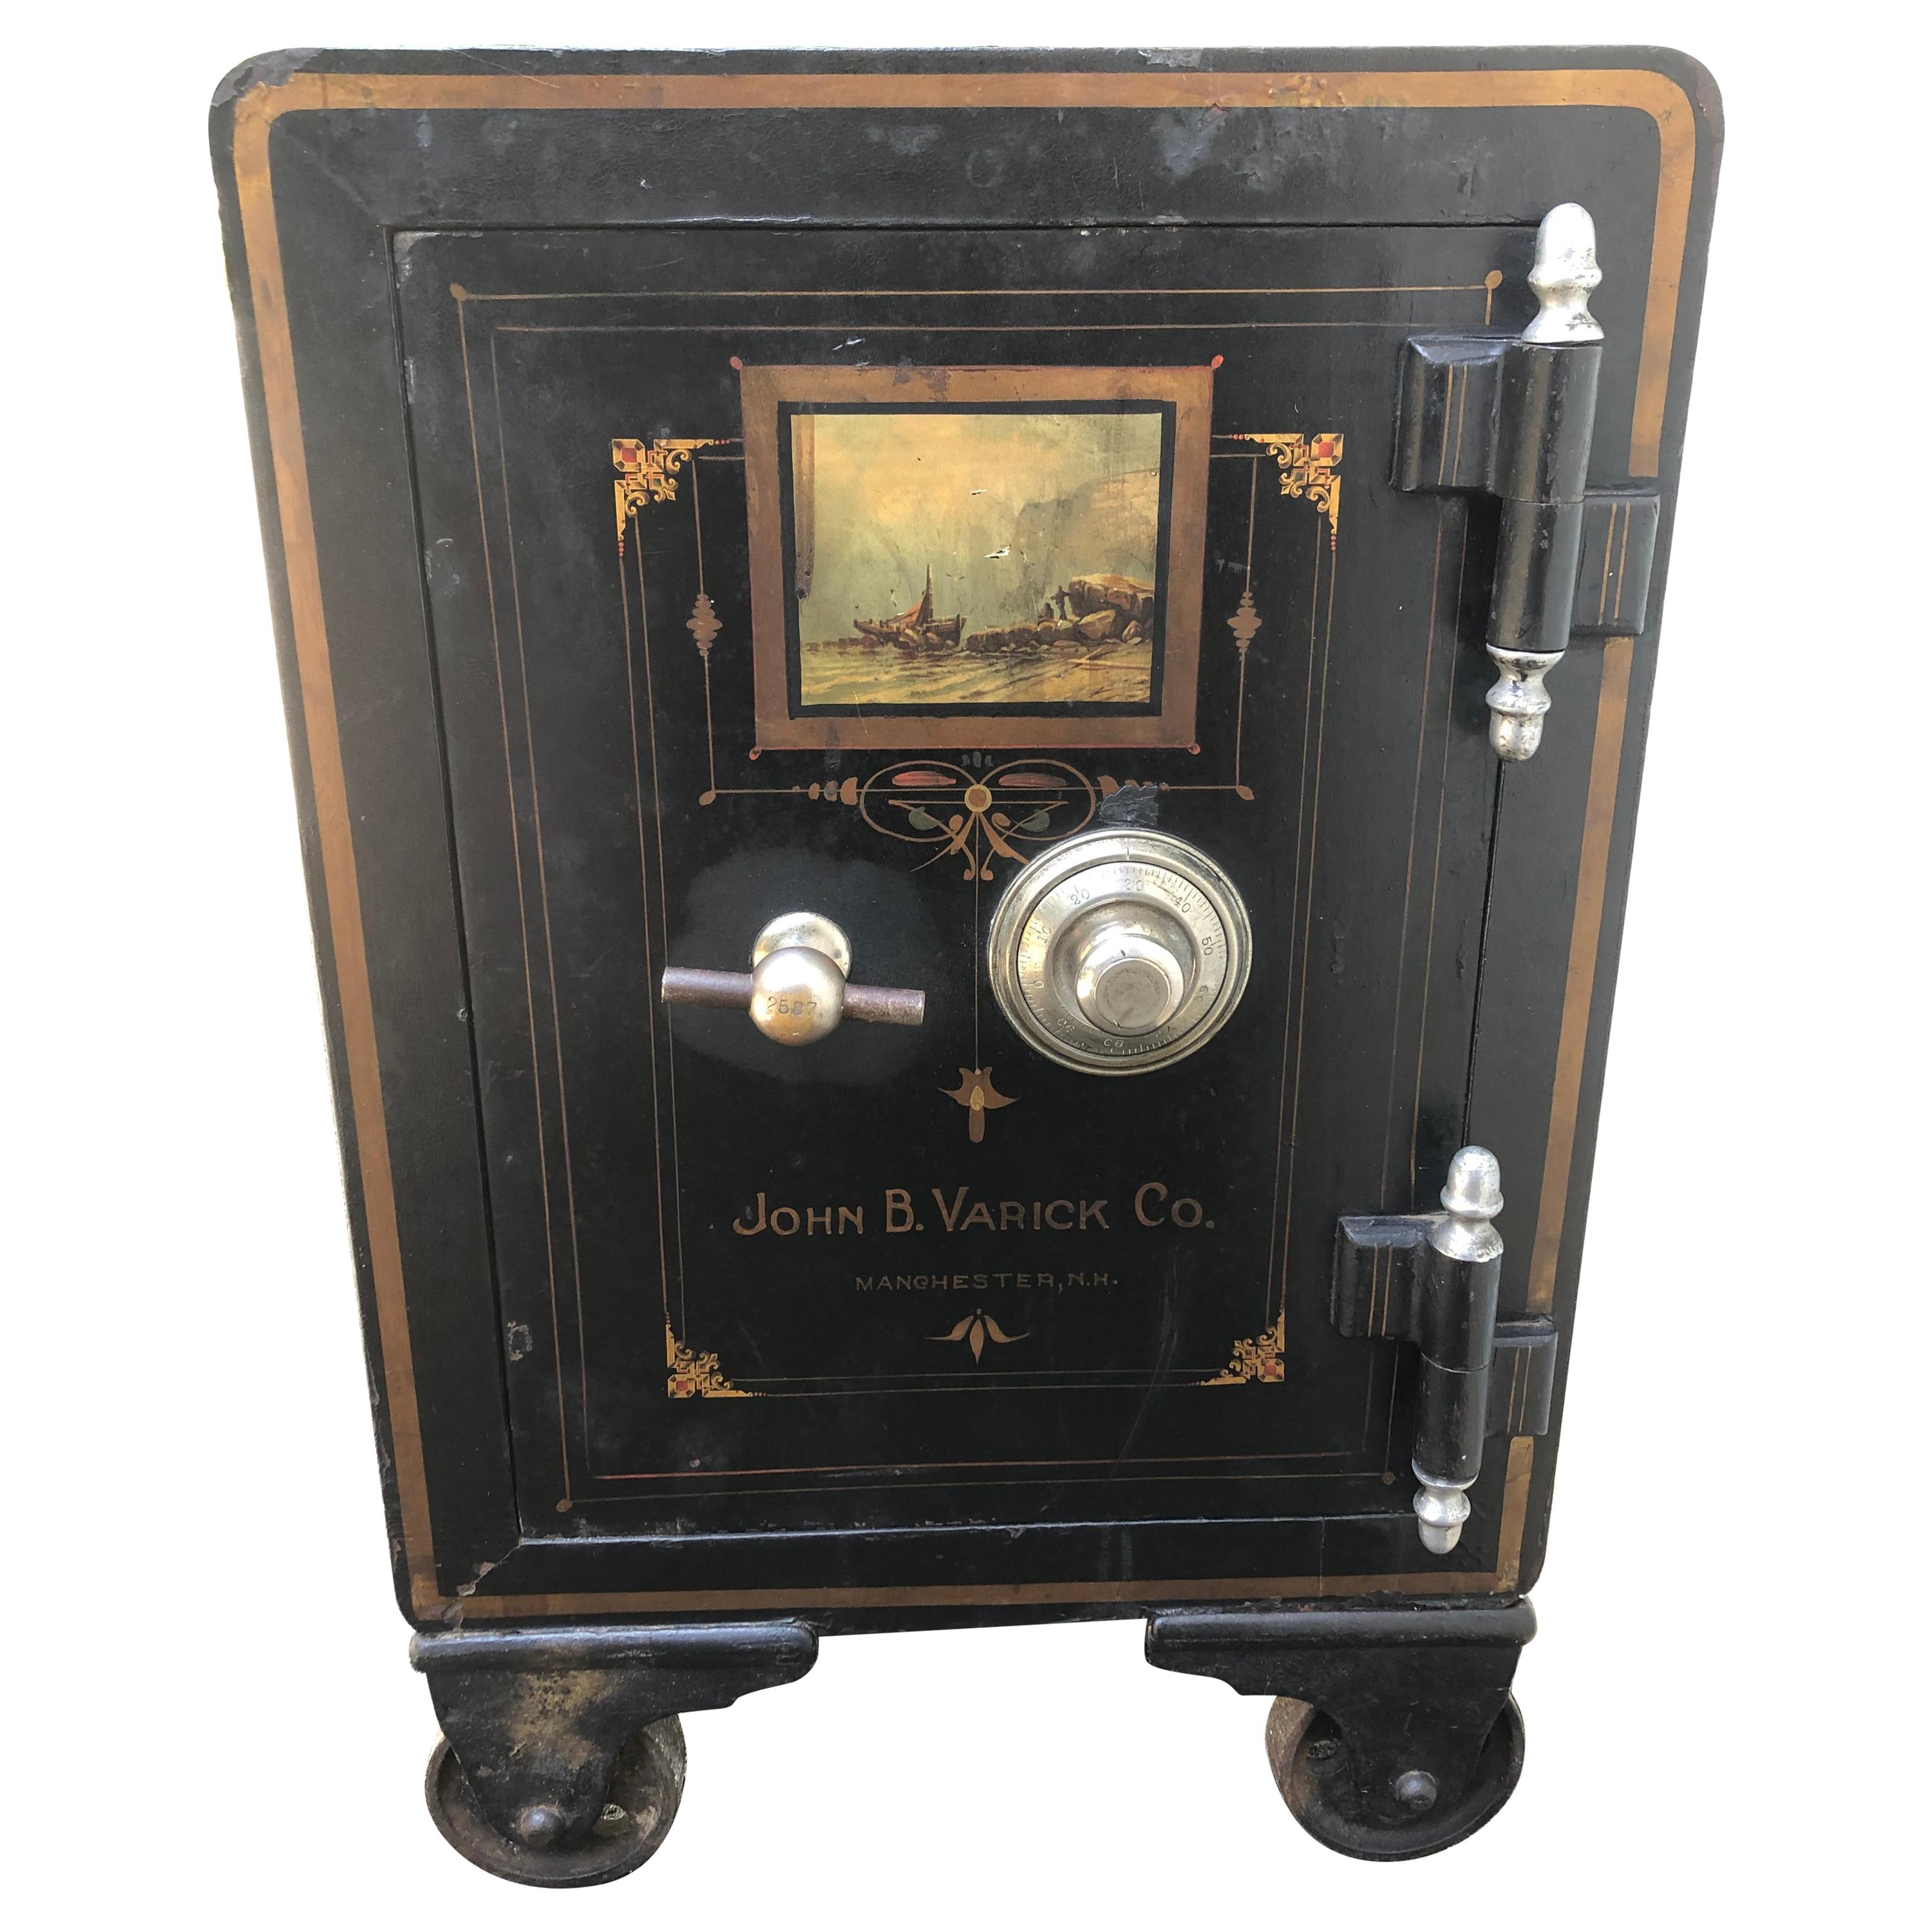 Wonderful Antique Black Cast Iron and Painted Safe by John B. Varick Co.